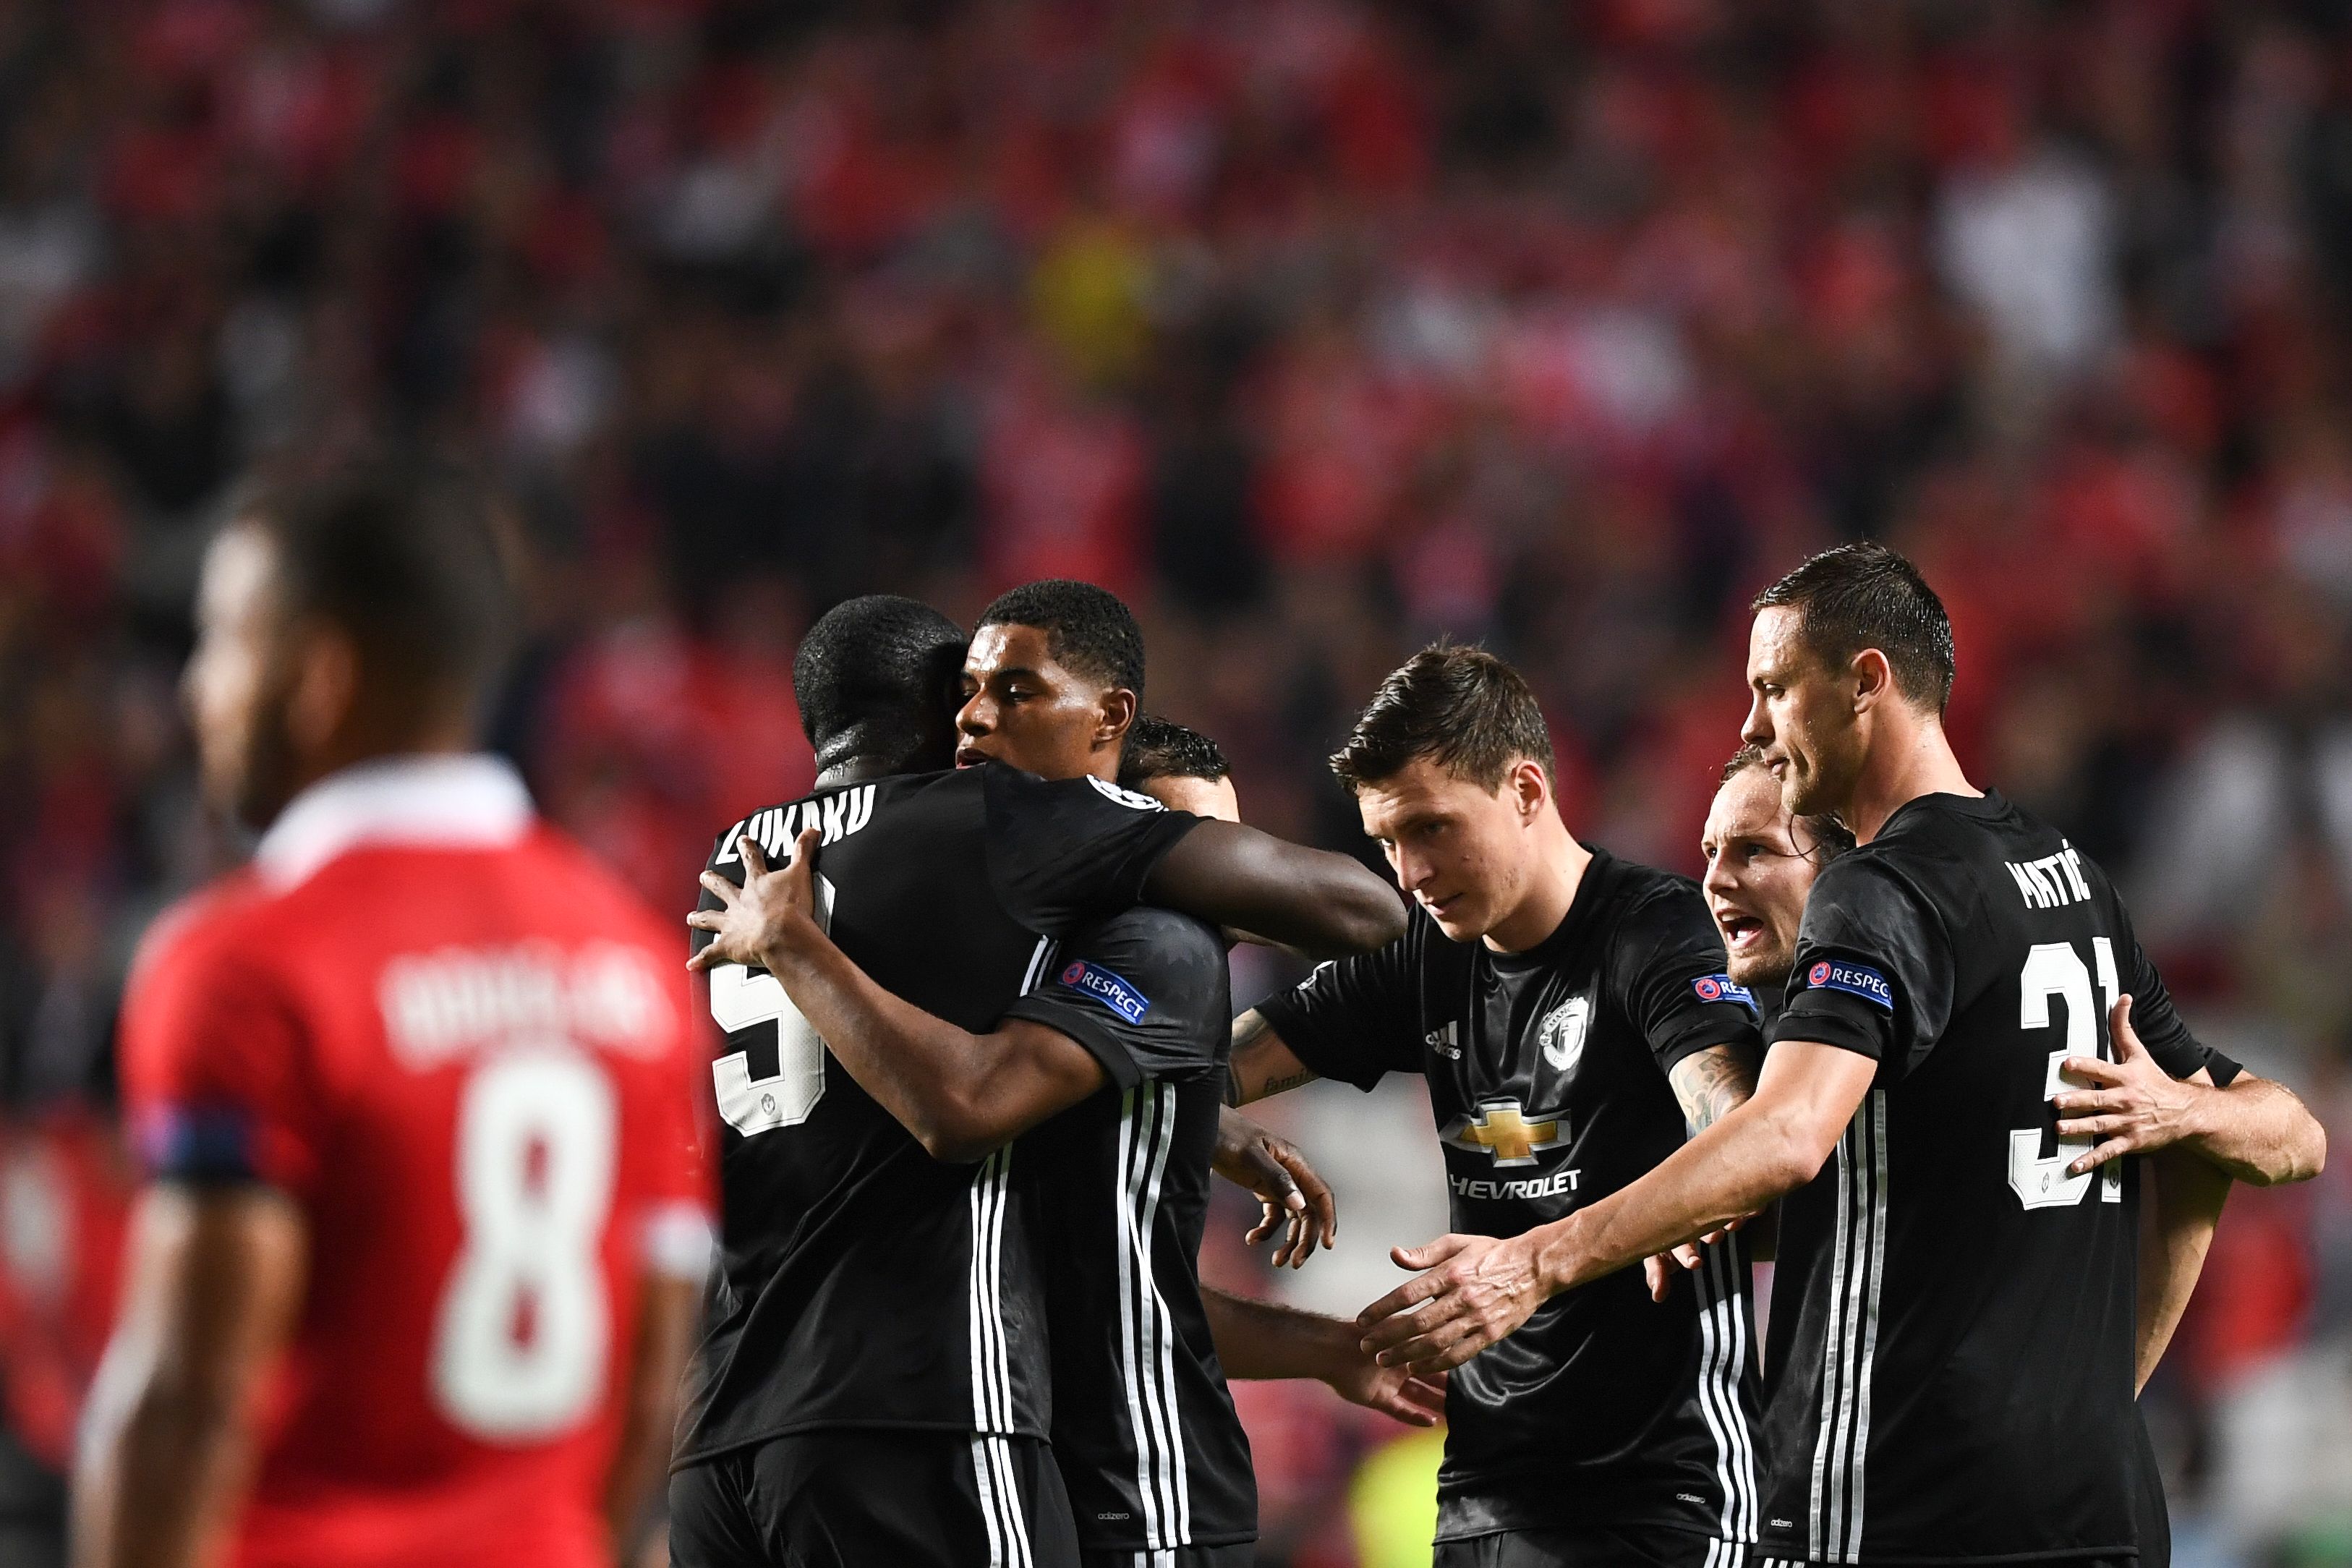 Manchester United's forward Marcus Rashford (2L) celebrates a goal during the UEFA Champions League group A football match SL Benfica vs Manchester United FC at the Luz stadium in Lisbon on Ocotber 18, 2017. / AFP PHOTO / PATRICIA DE MELO MOREIRA        (Photo credit should read PATRICIA DE MELO MOREIRA/AFP/Getty Images)